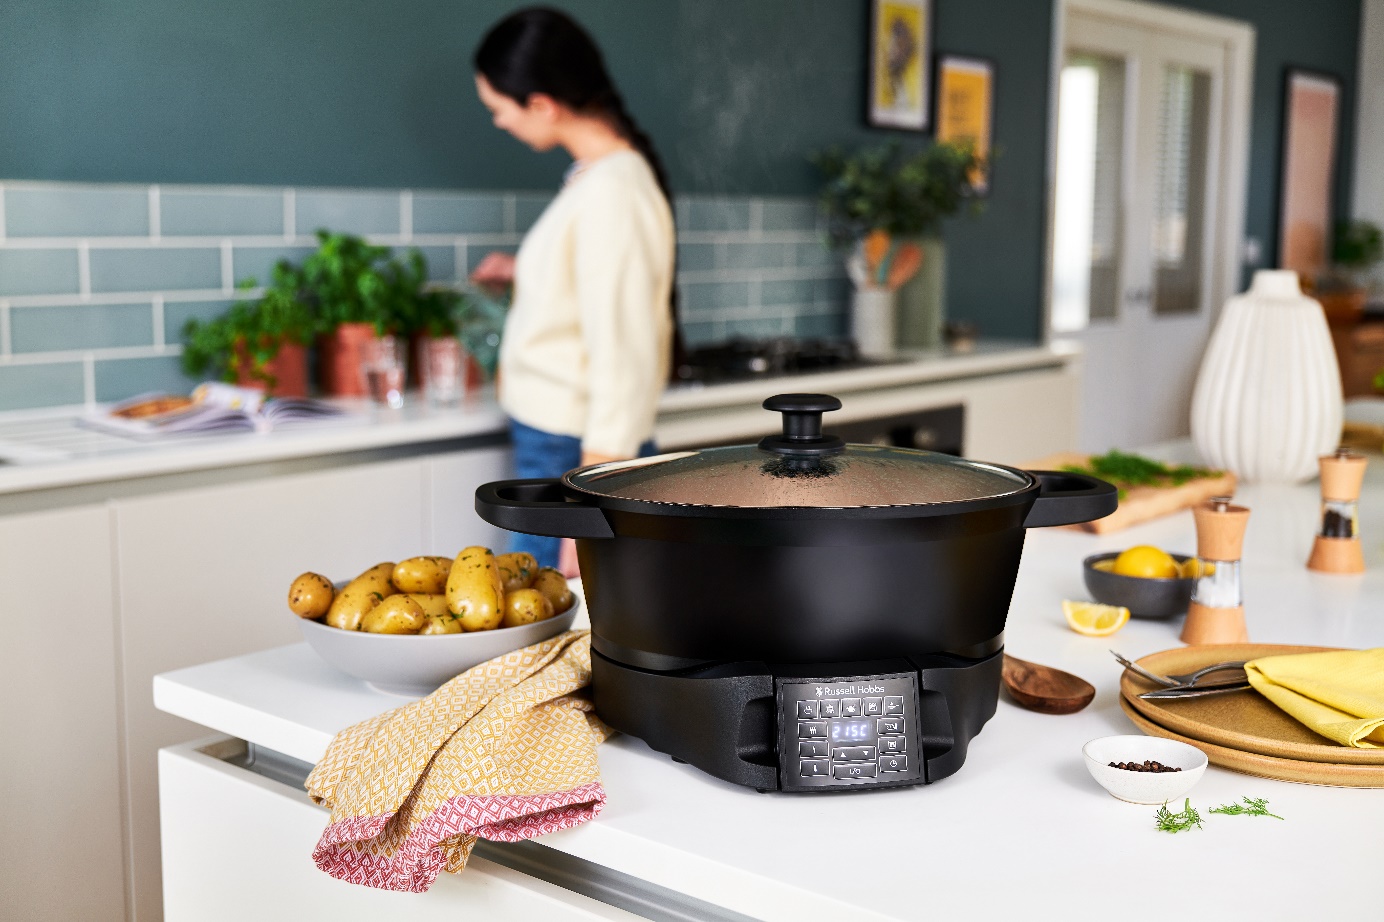 Energy Efficient, Versatile Cooking for Every Season with the Good to Go Multi-Cooker from Russell Hobbs